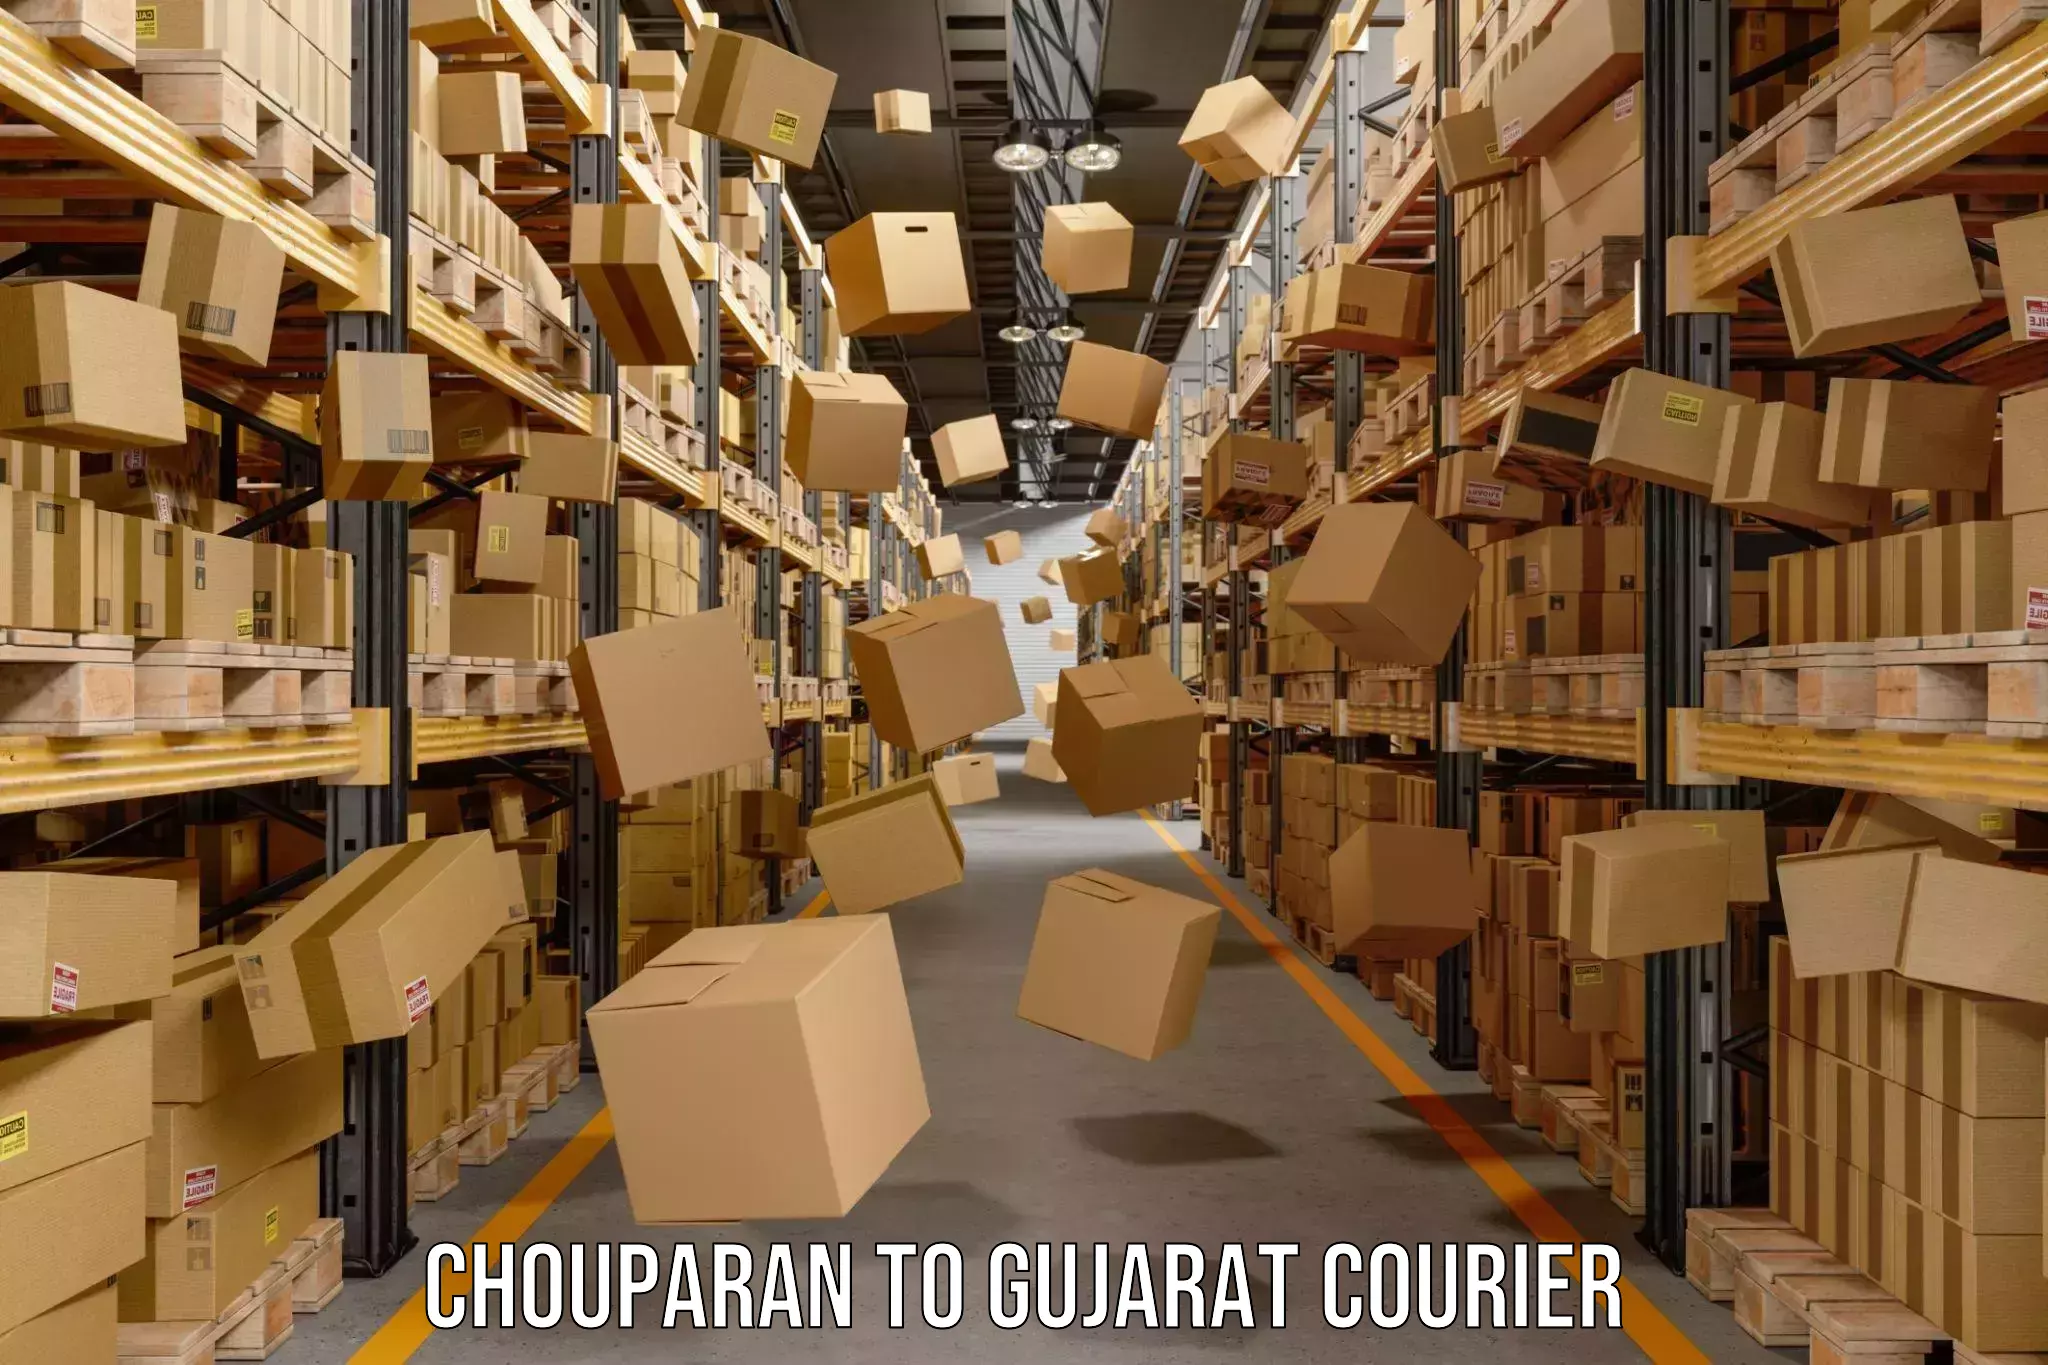 Express delivery network Chouparan to Gujarat